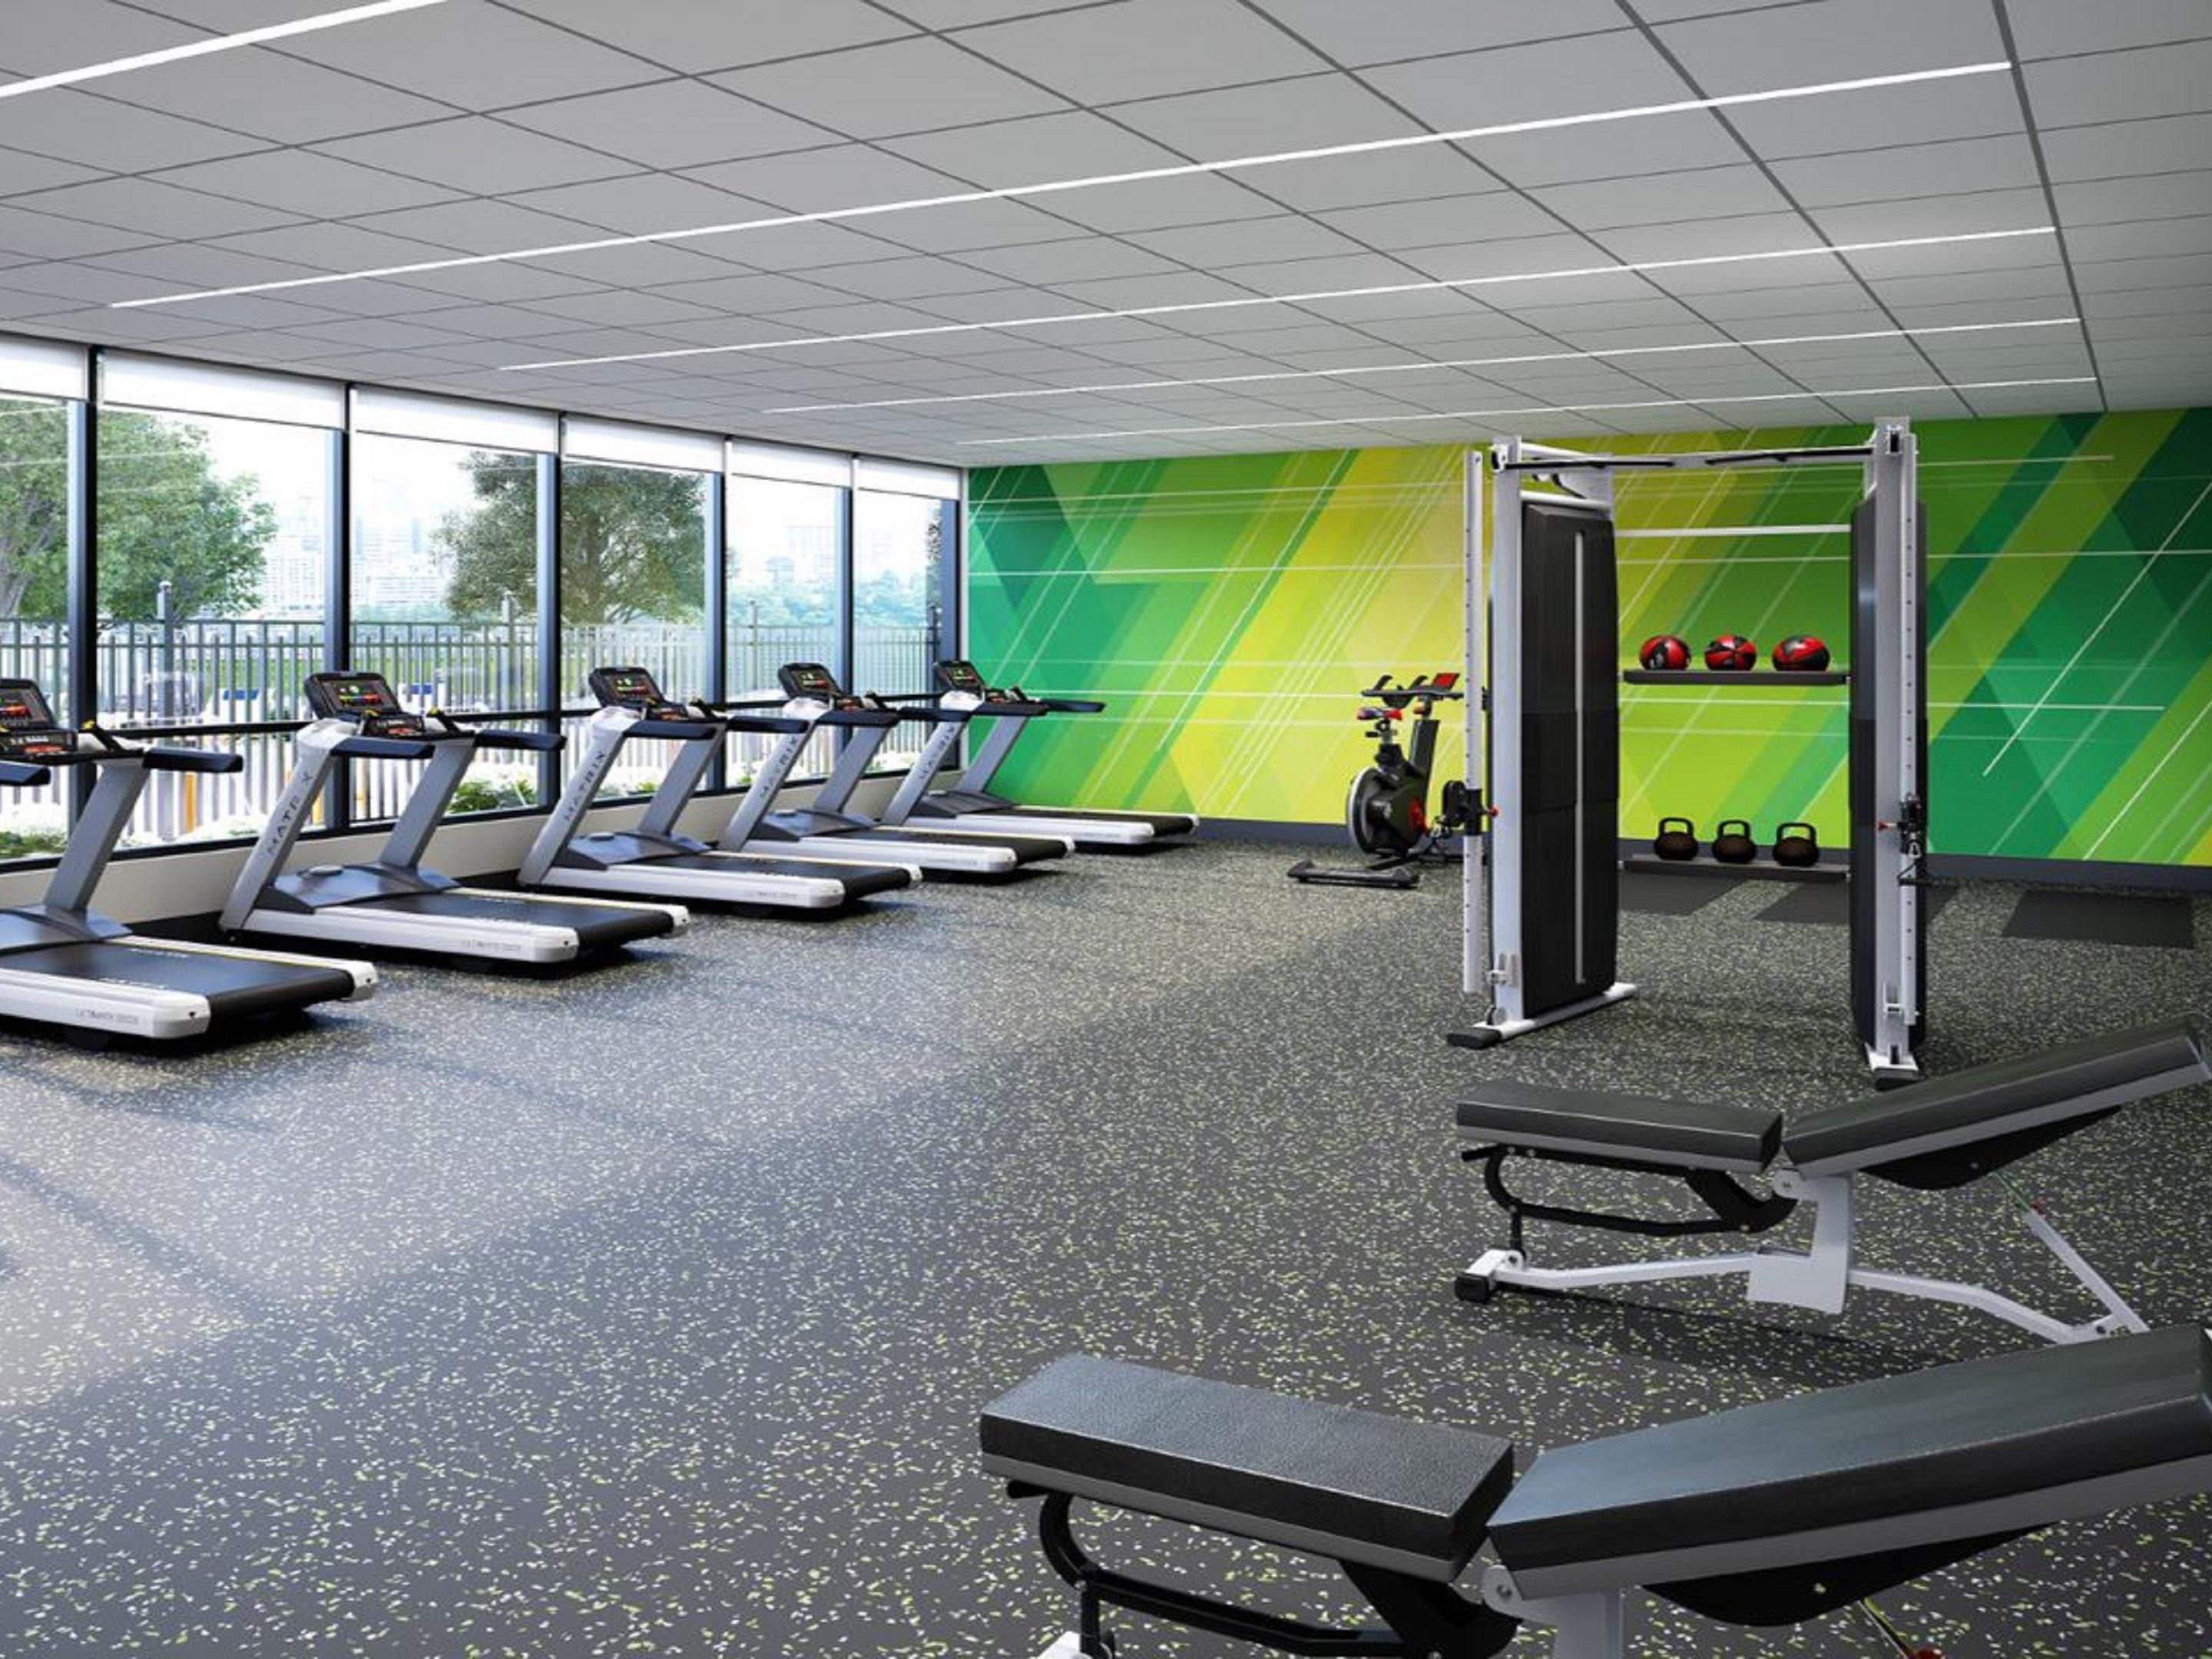 Get your sweat on in our complimentary, fully equipped fitness center- open 24 hours.